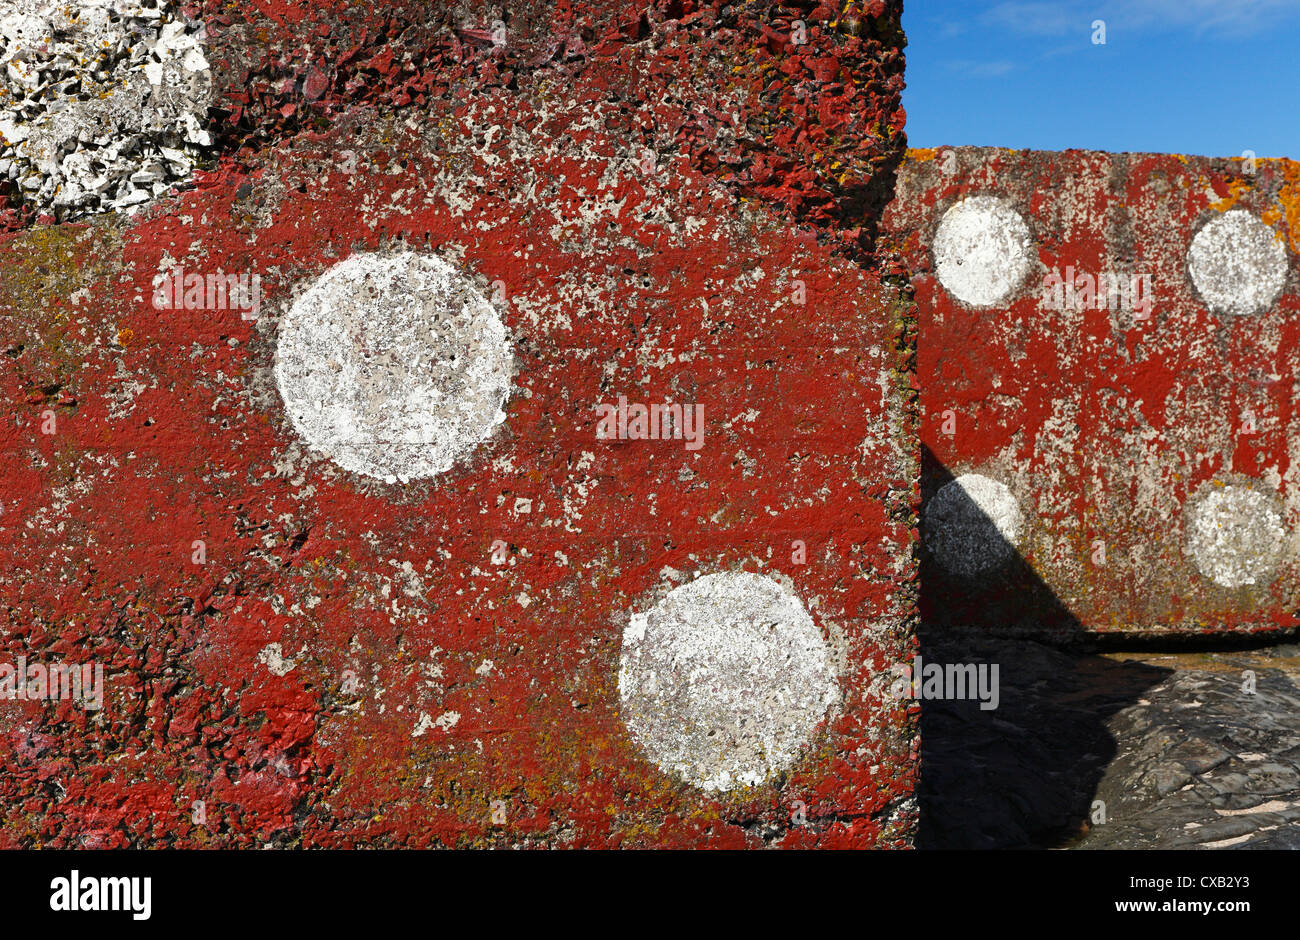 Giant concrete cubes found on Bamburgh beach in Northumberland painted as red dice. Stock Photo